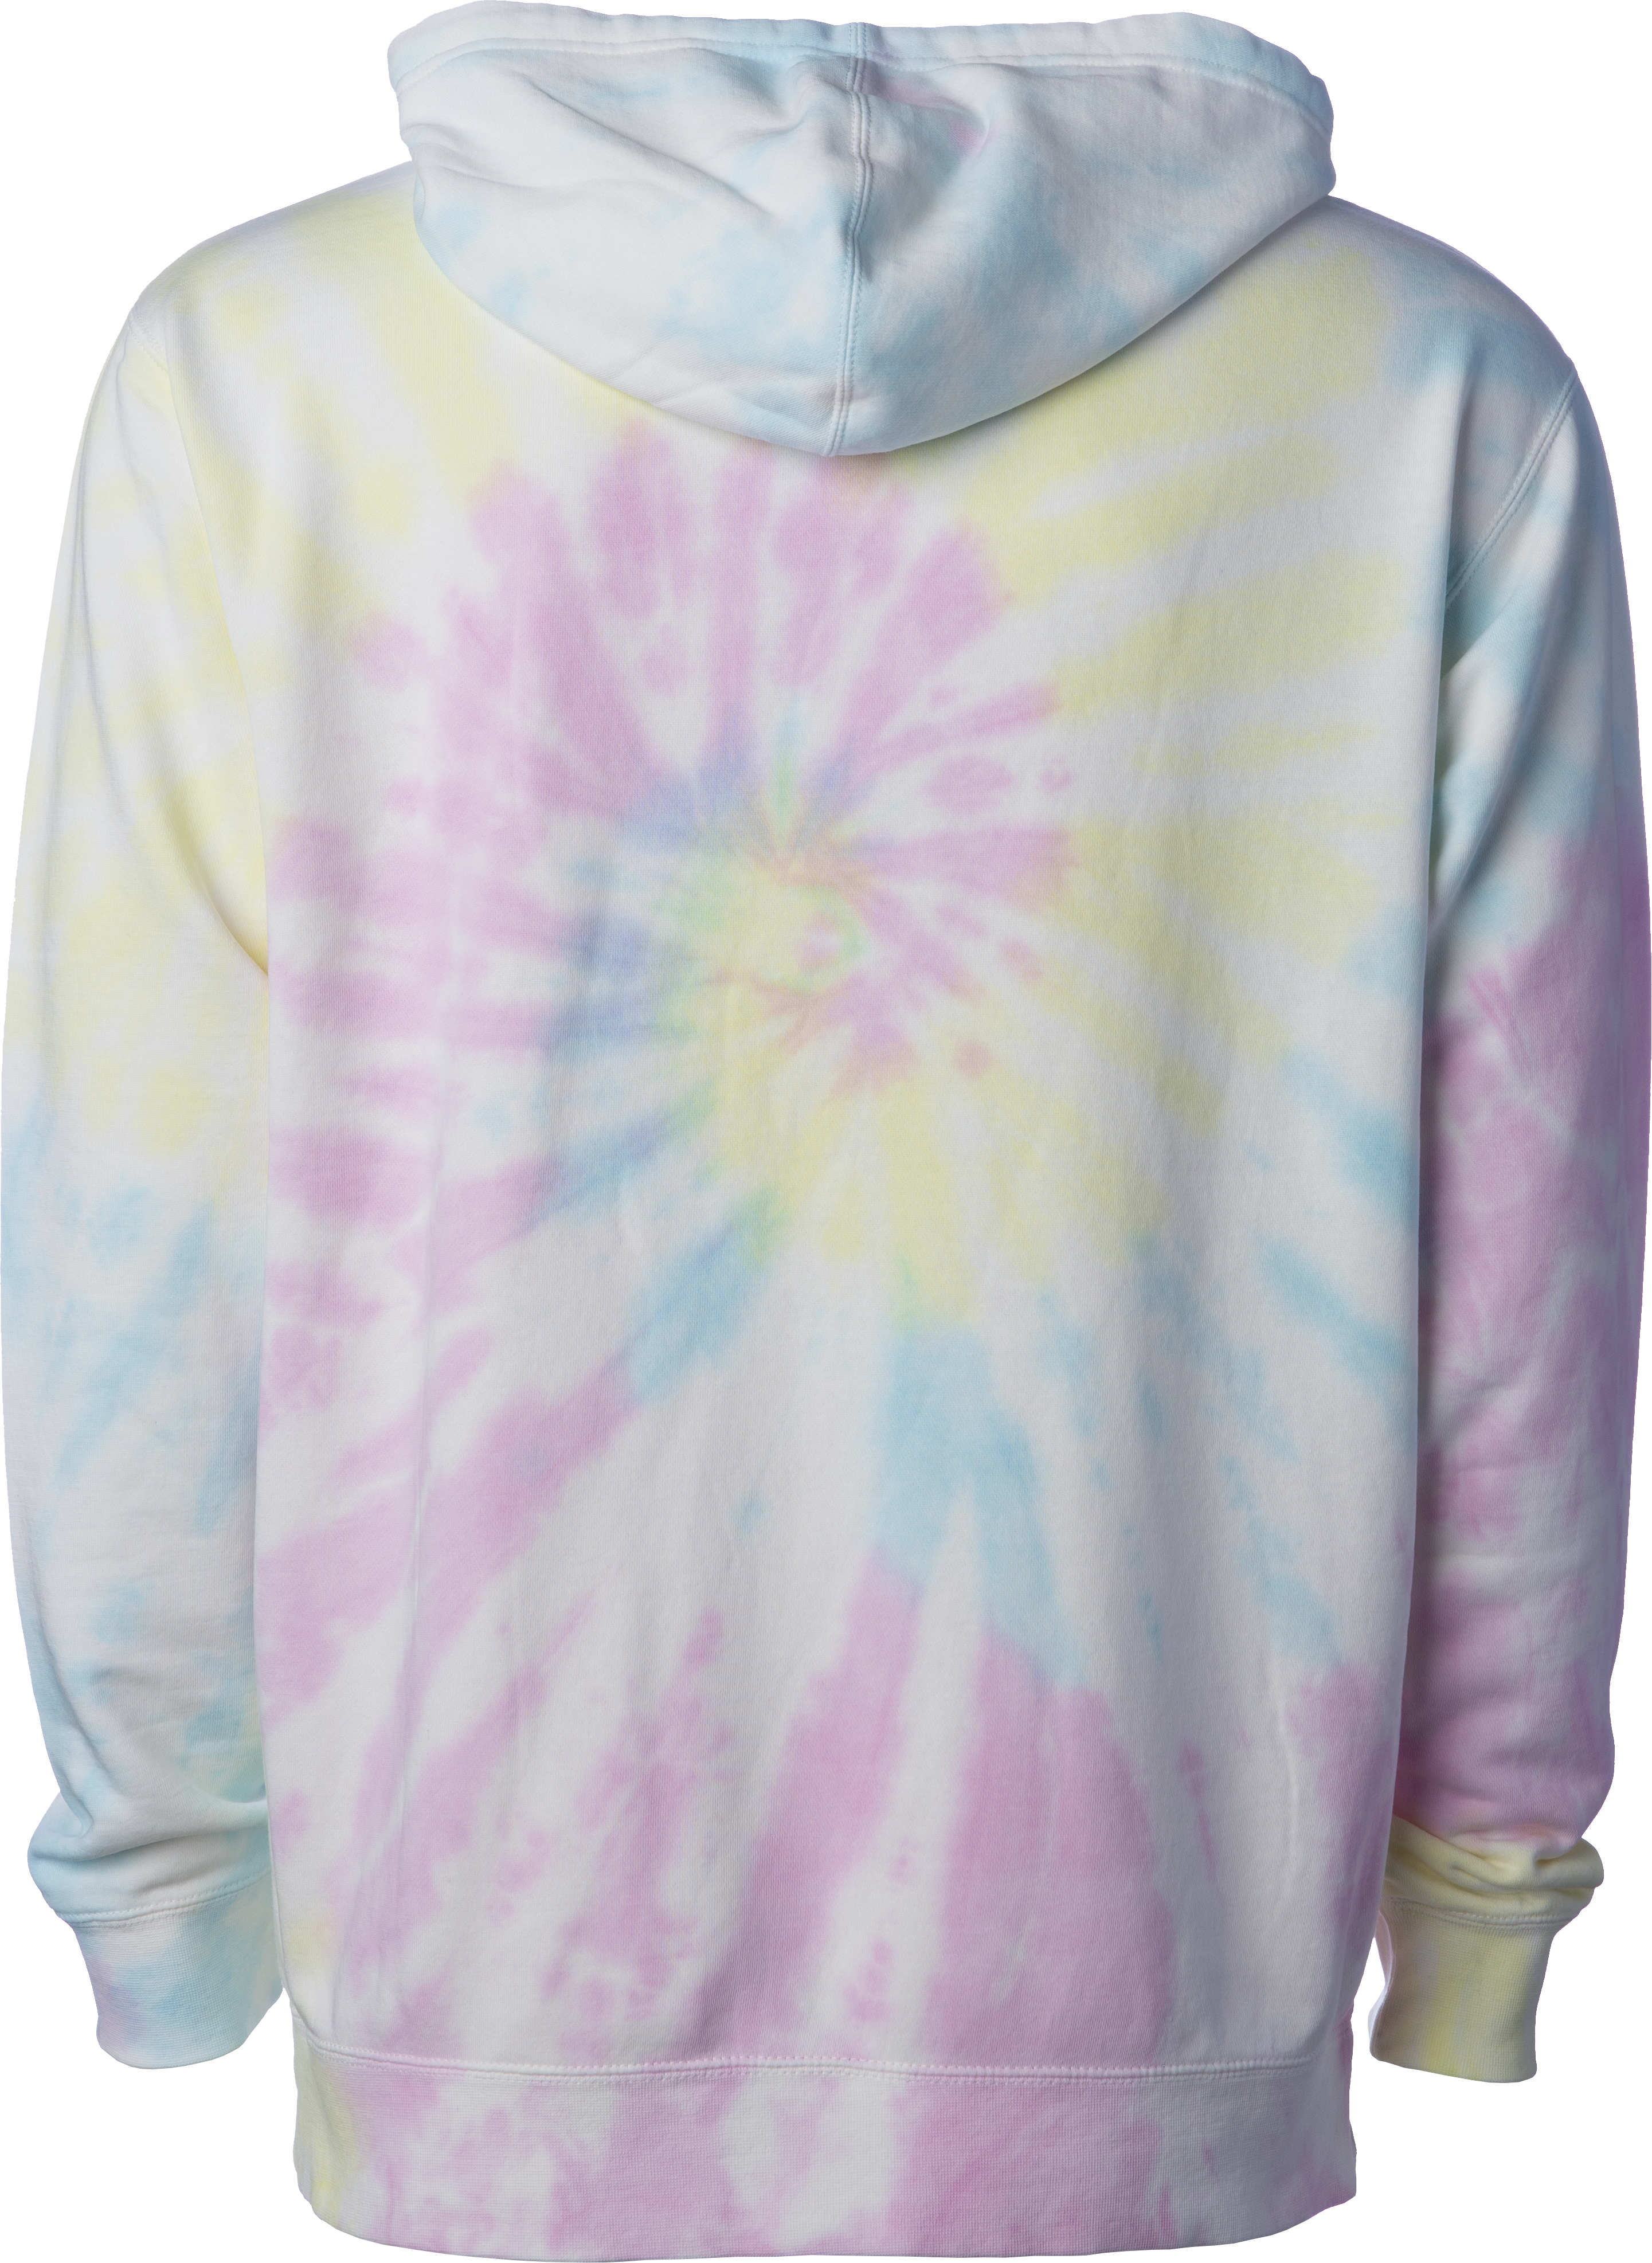 25 Pcs Style H Sublimation Blank Hoodies Tie Dye Pullover